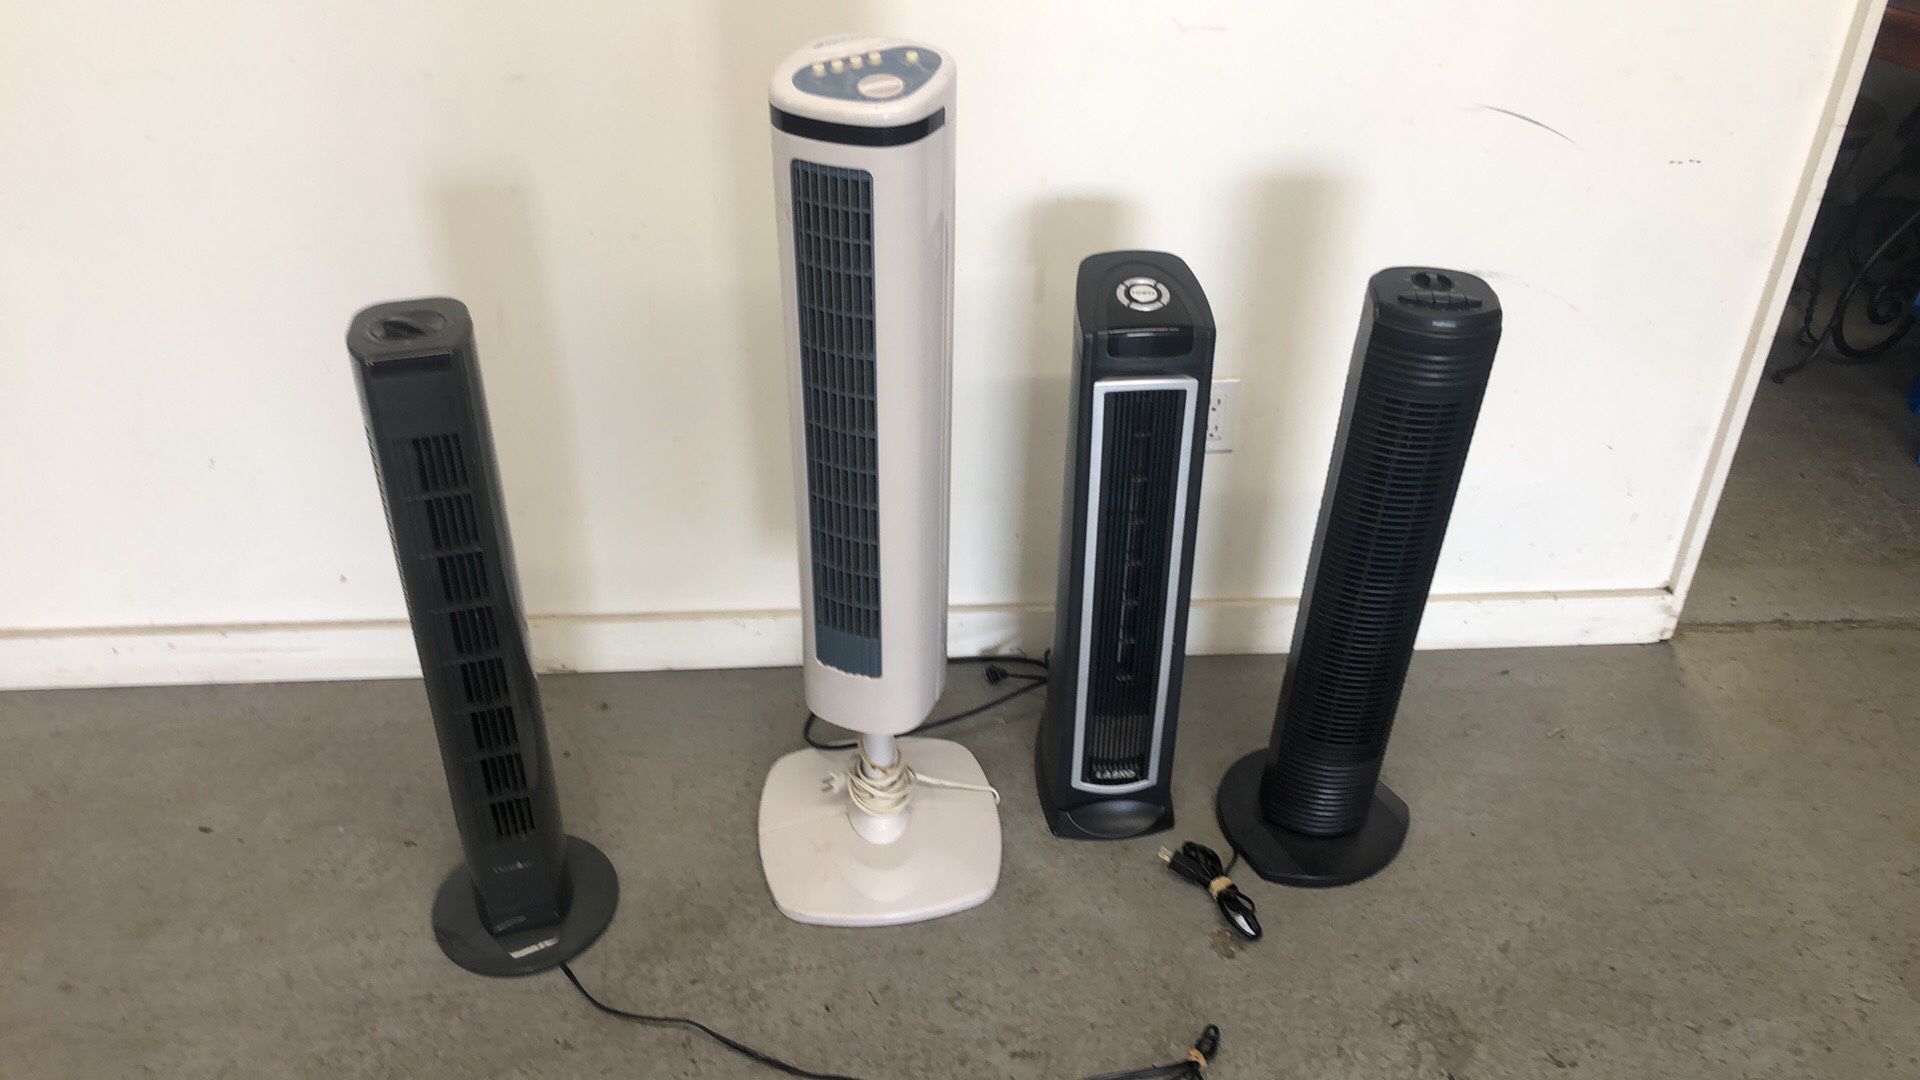 Tower fan good condition work great Different prices